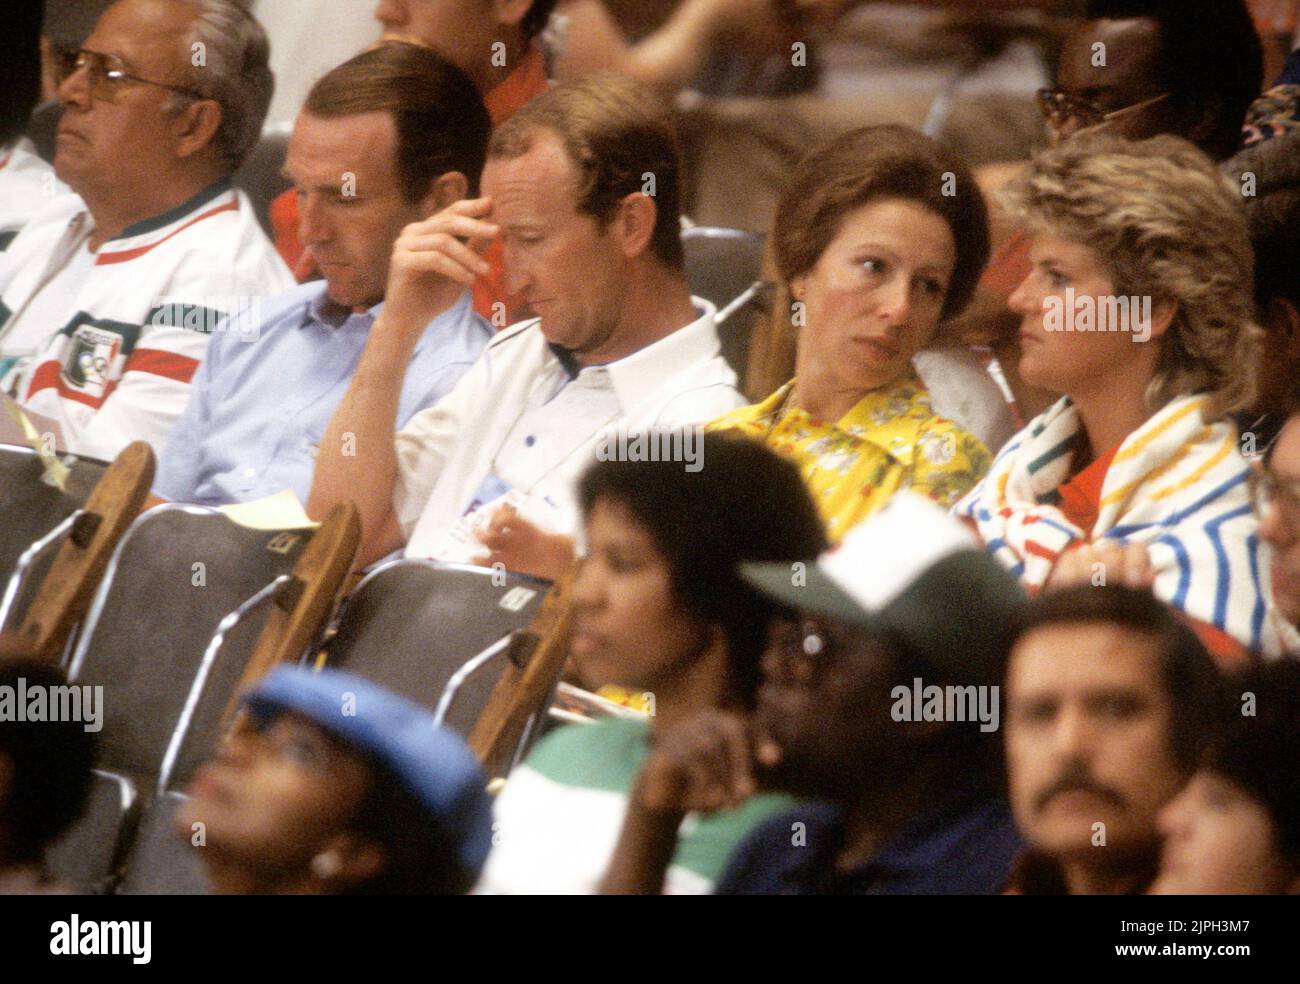 SUMMER OLYMPICS IN LOS ANGELES 1984Englands Princess Anne among the audience in Los Angeles in 1984 Stock Photo